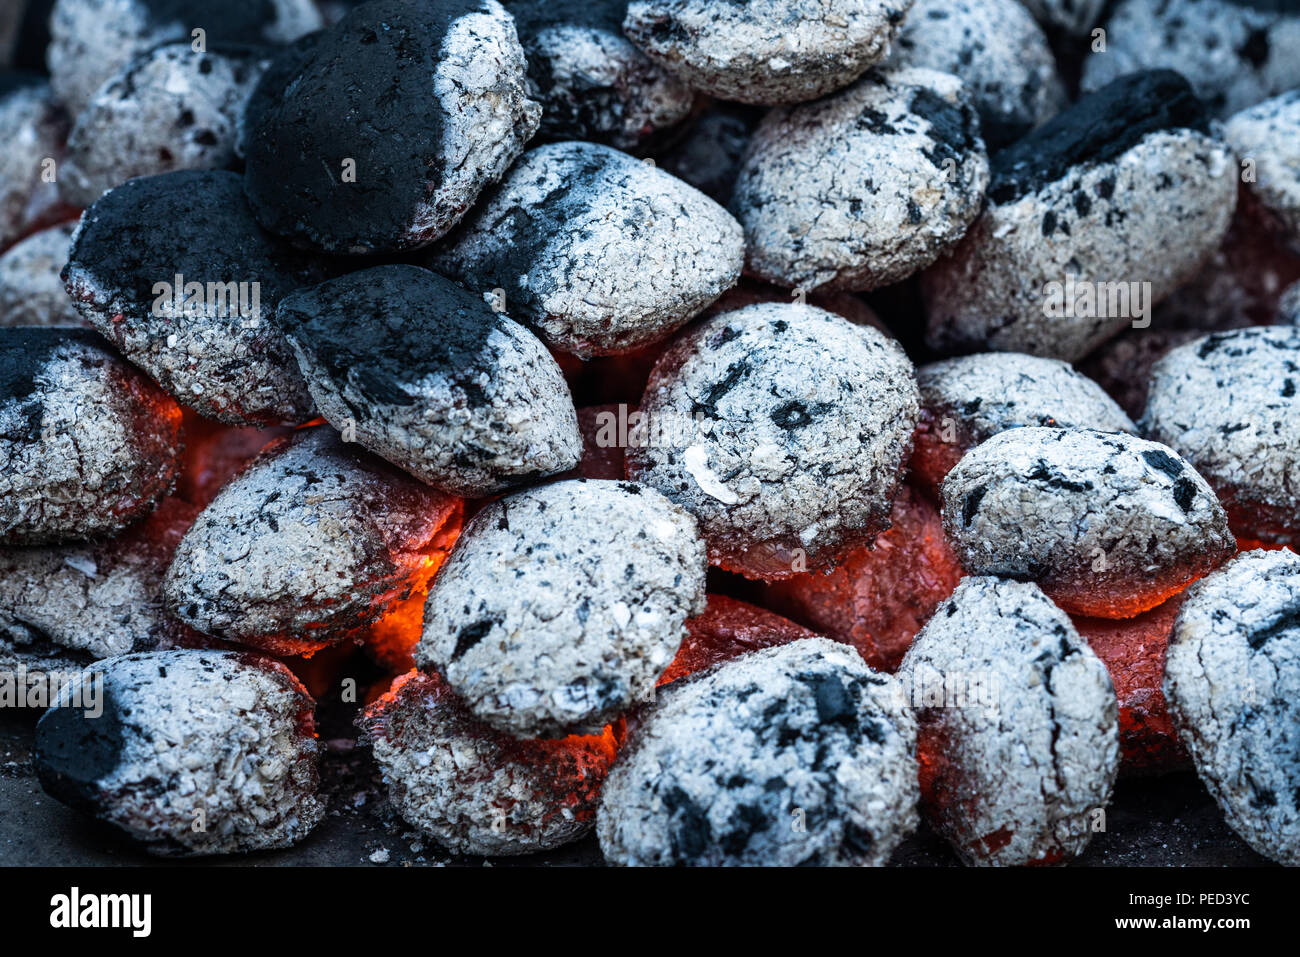 Charcoal is burning on a charcoal grill for barbeque. Stock Photo